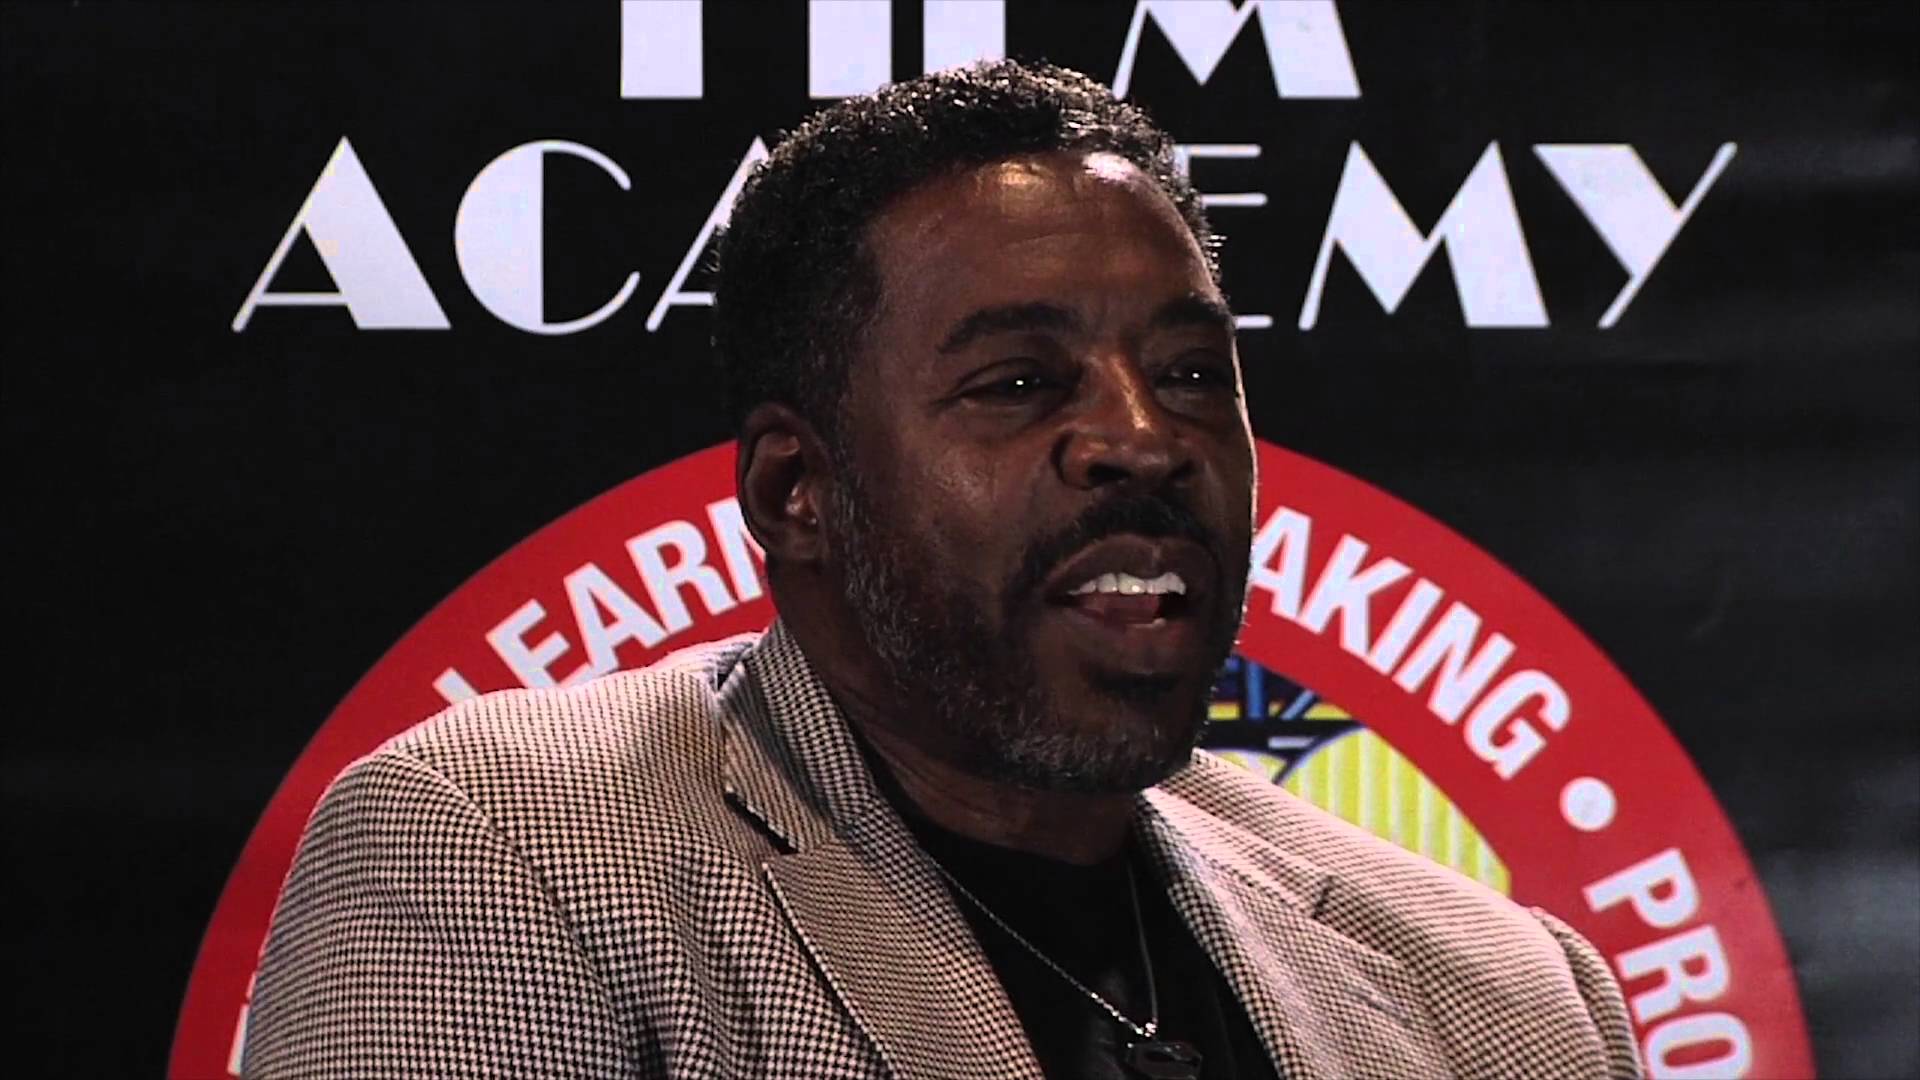 Discussion with Actor Ernie Hudson at New York Film Academy